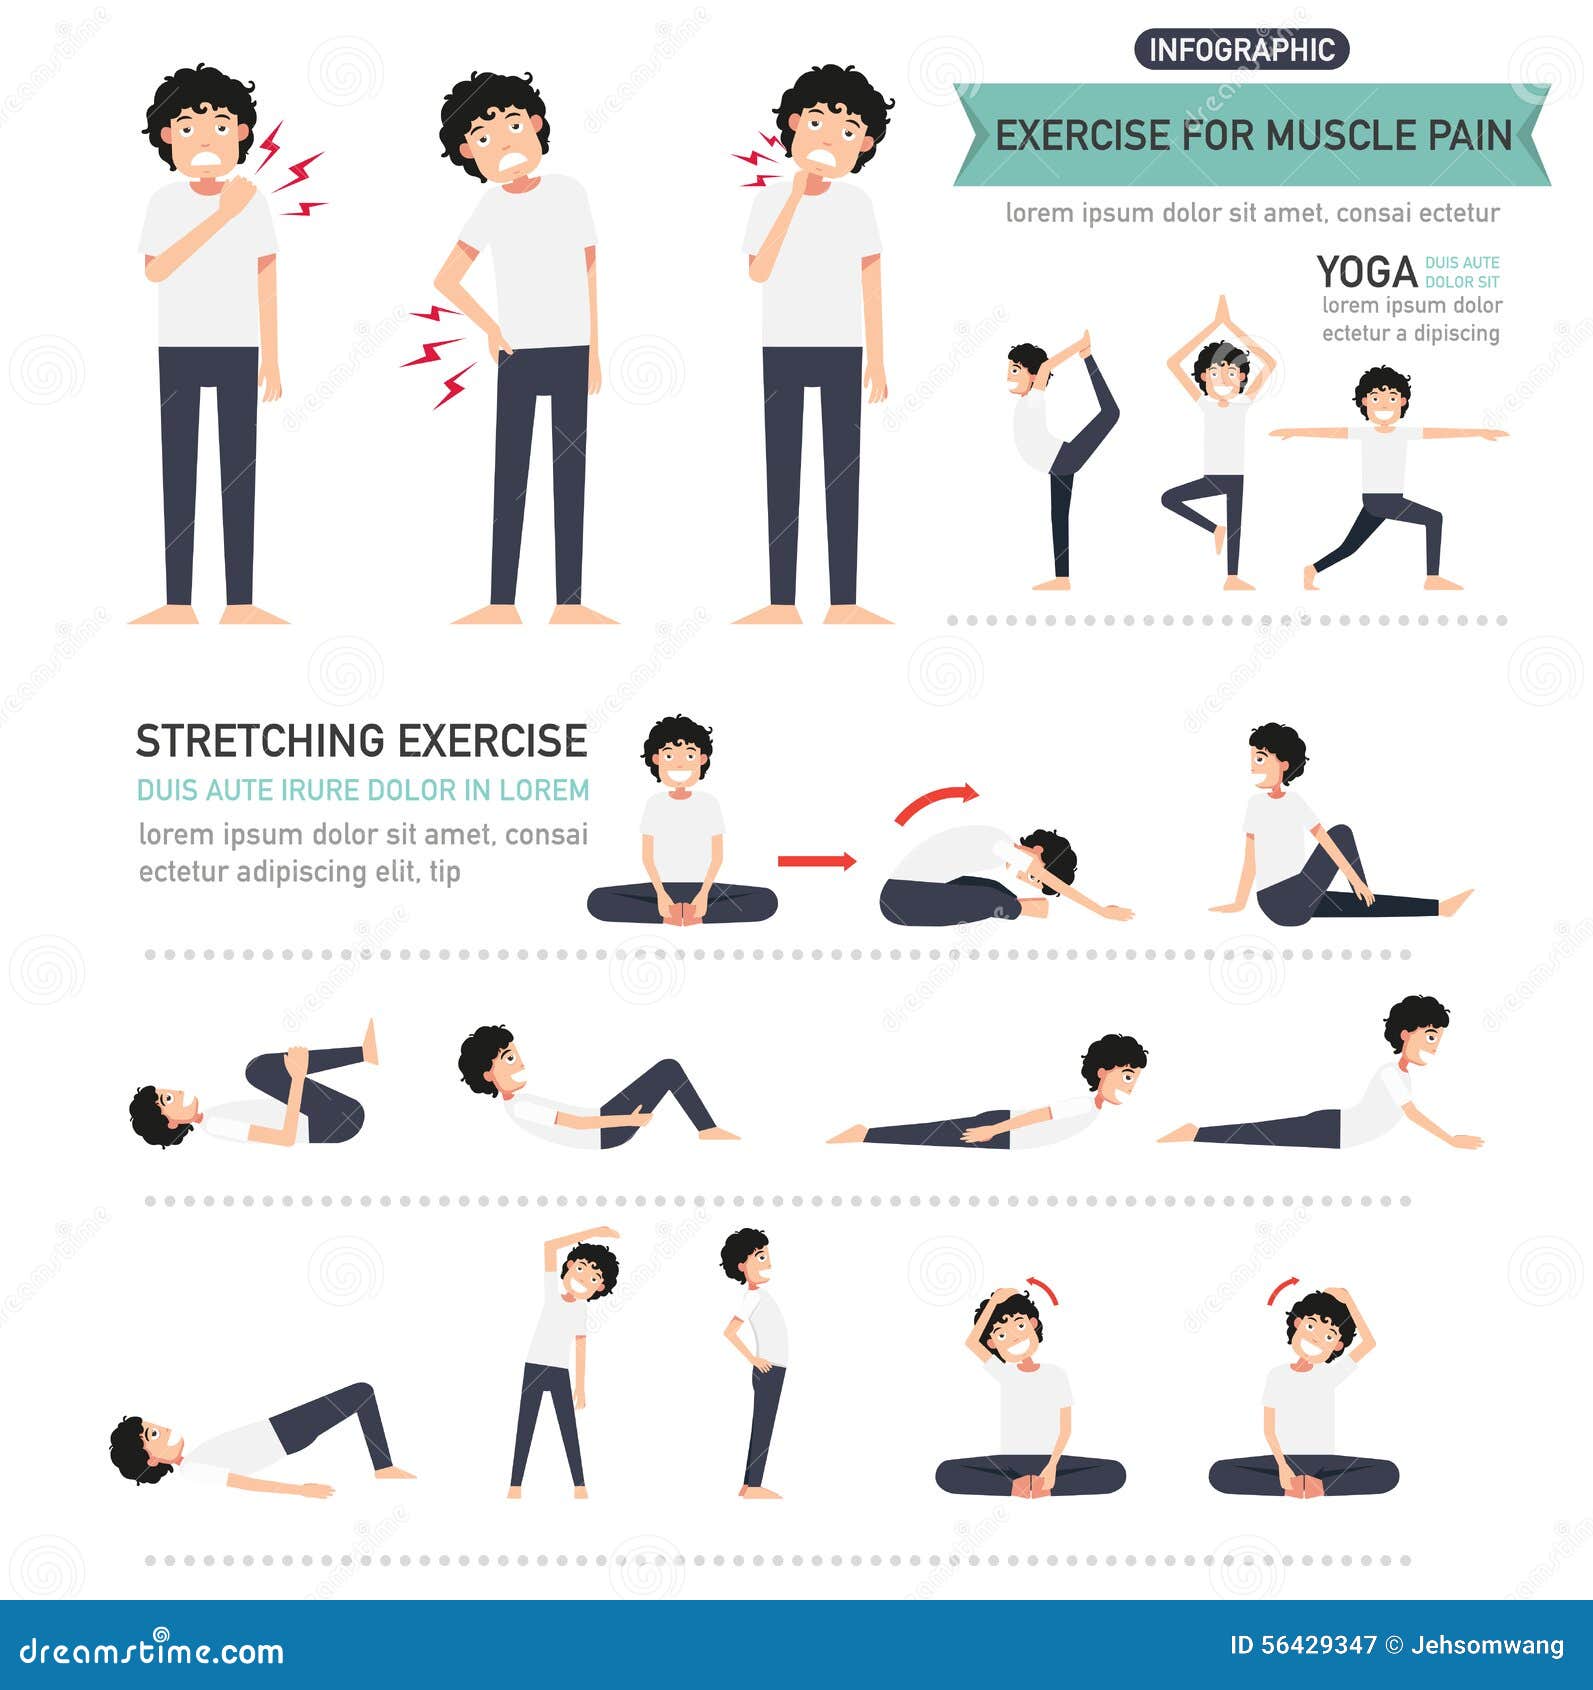 https://thumbs.dreamstime.com/z/exercise-muscle-pain-infographic-illustration-56429347.jpg